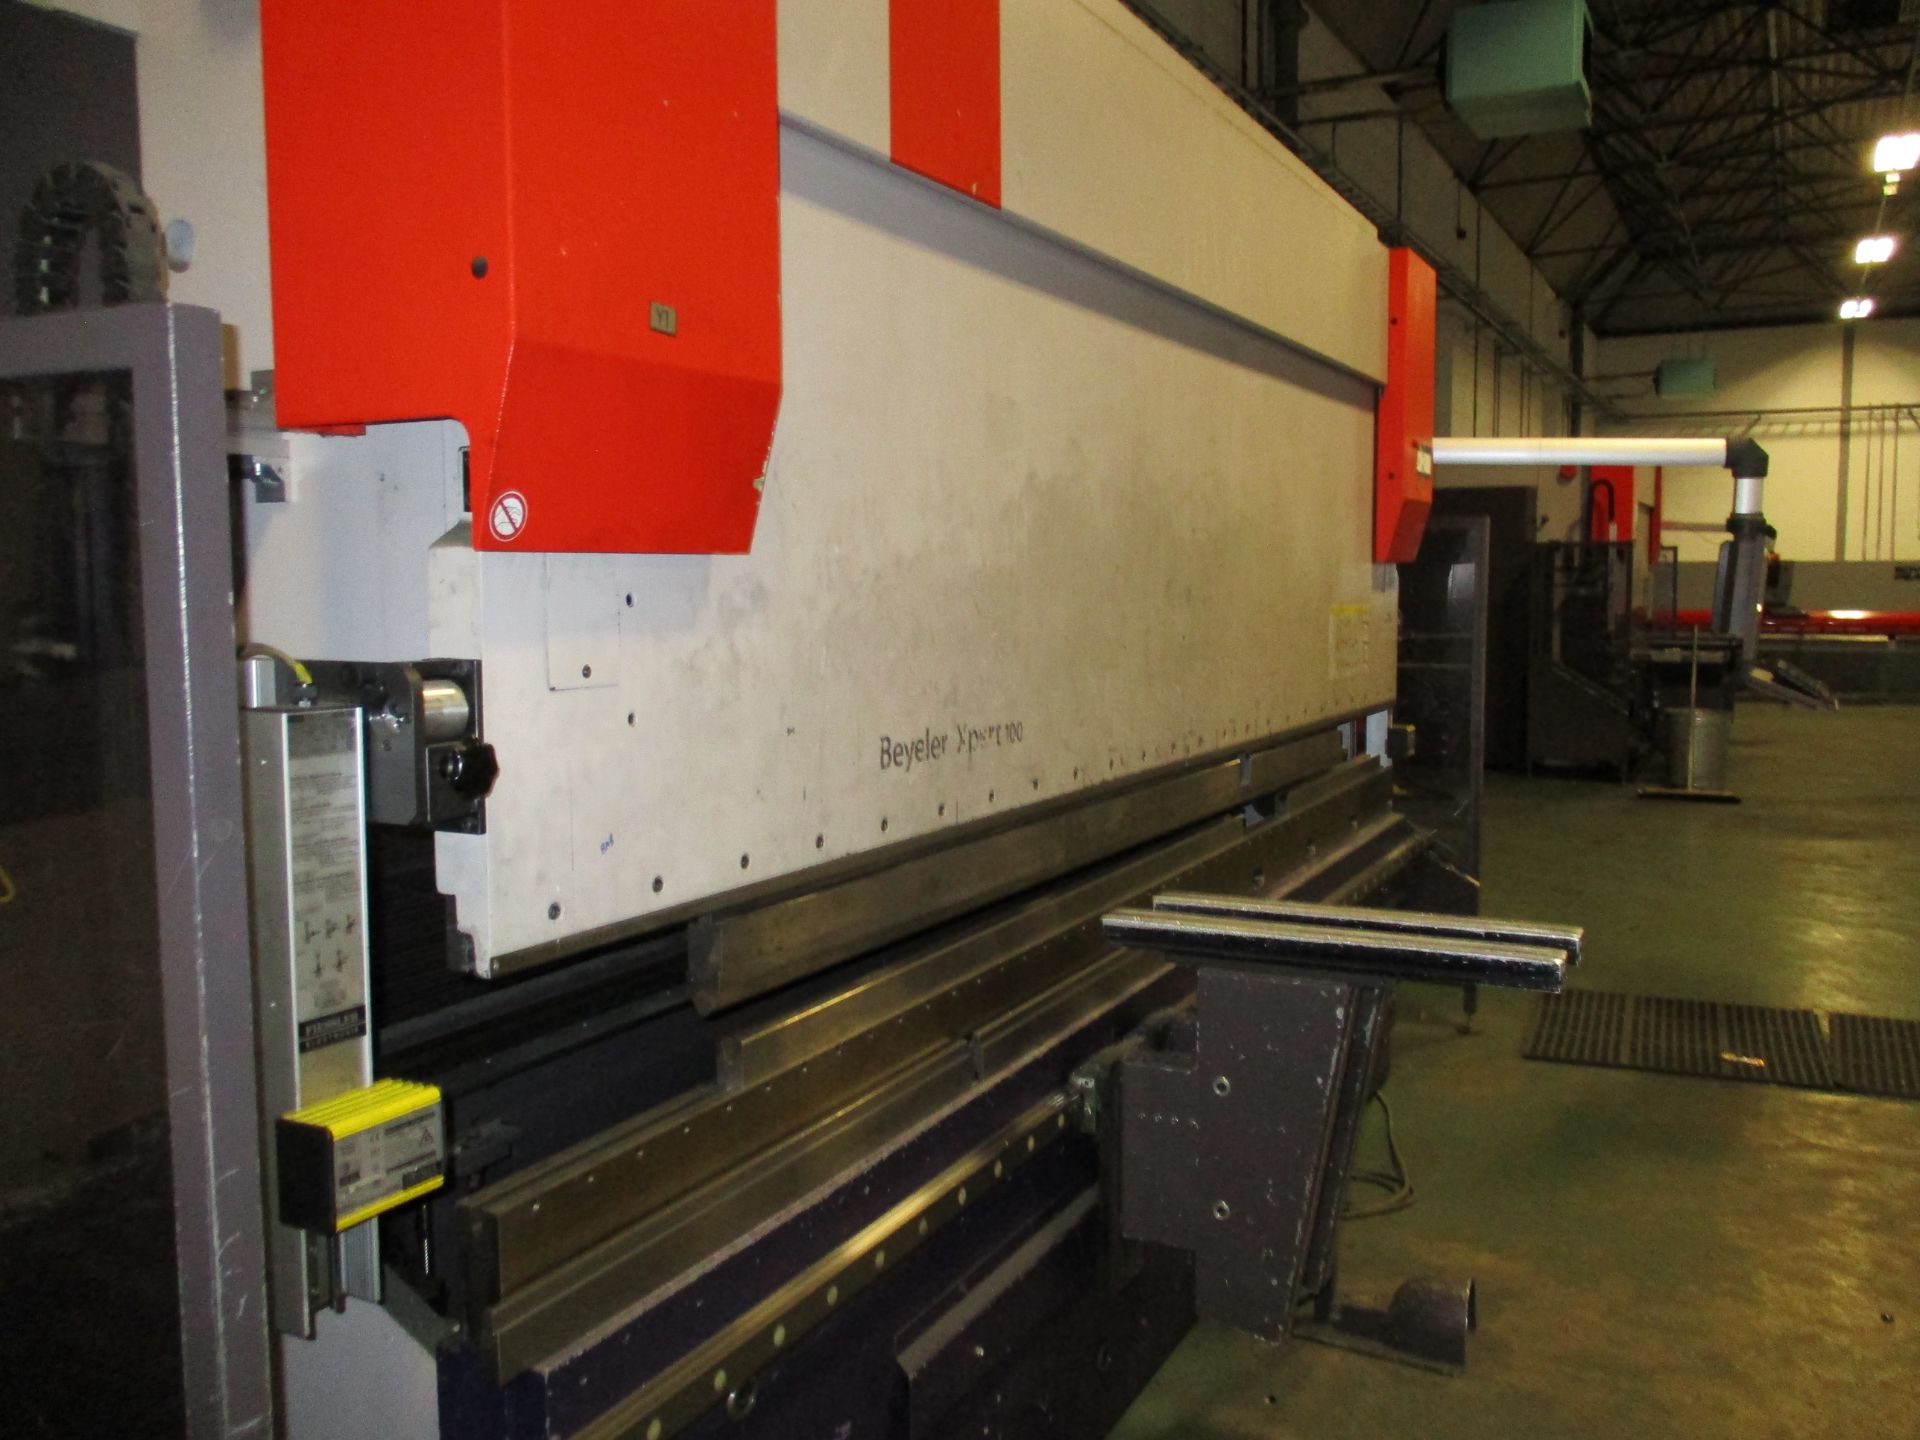 Bystronic Beyeler Xpert 100 x 4100 CNC Press Brake, serial no. 10520014, year of manufacture 2010, - Image 3 of 5